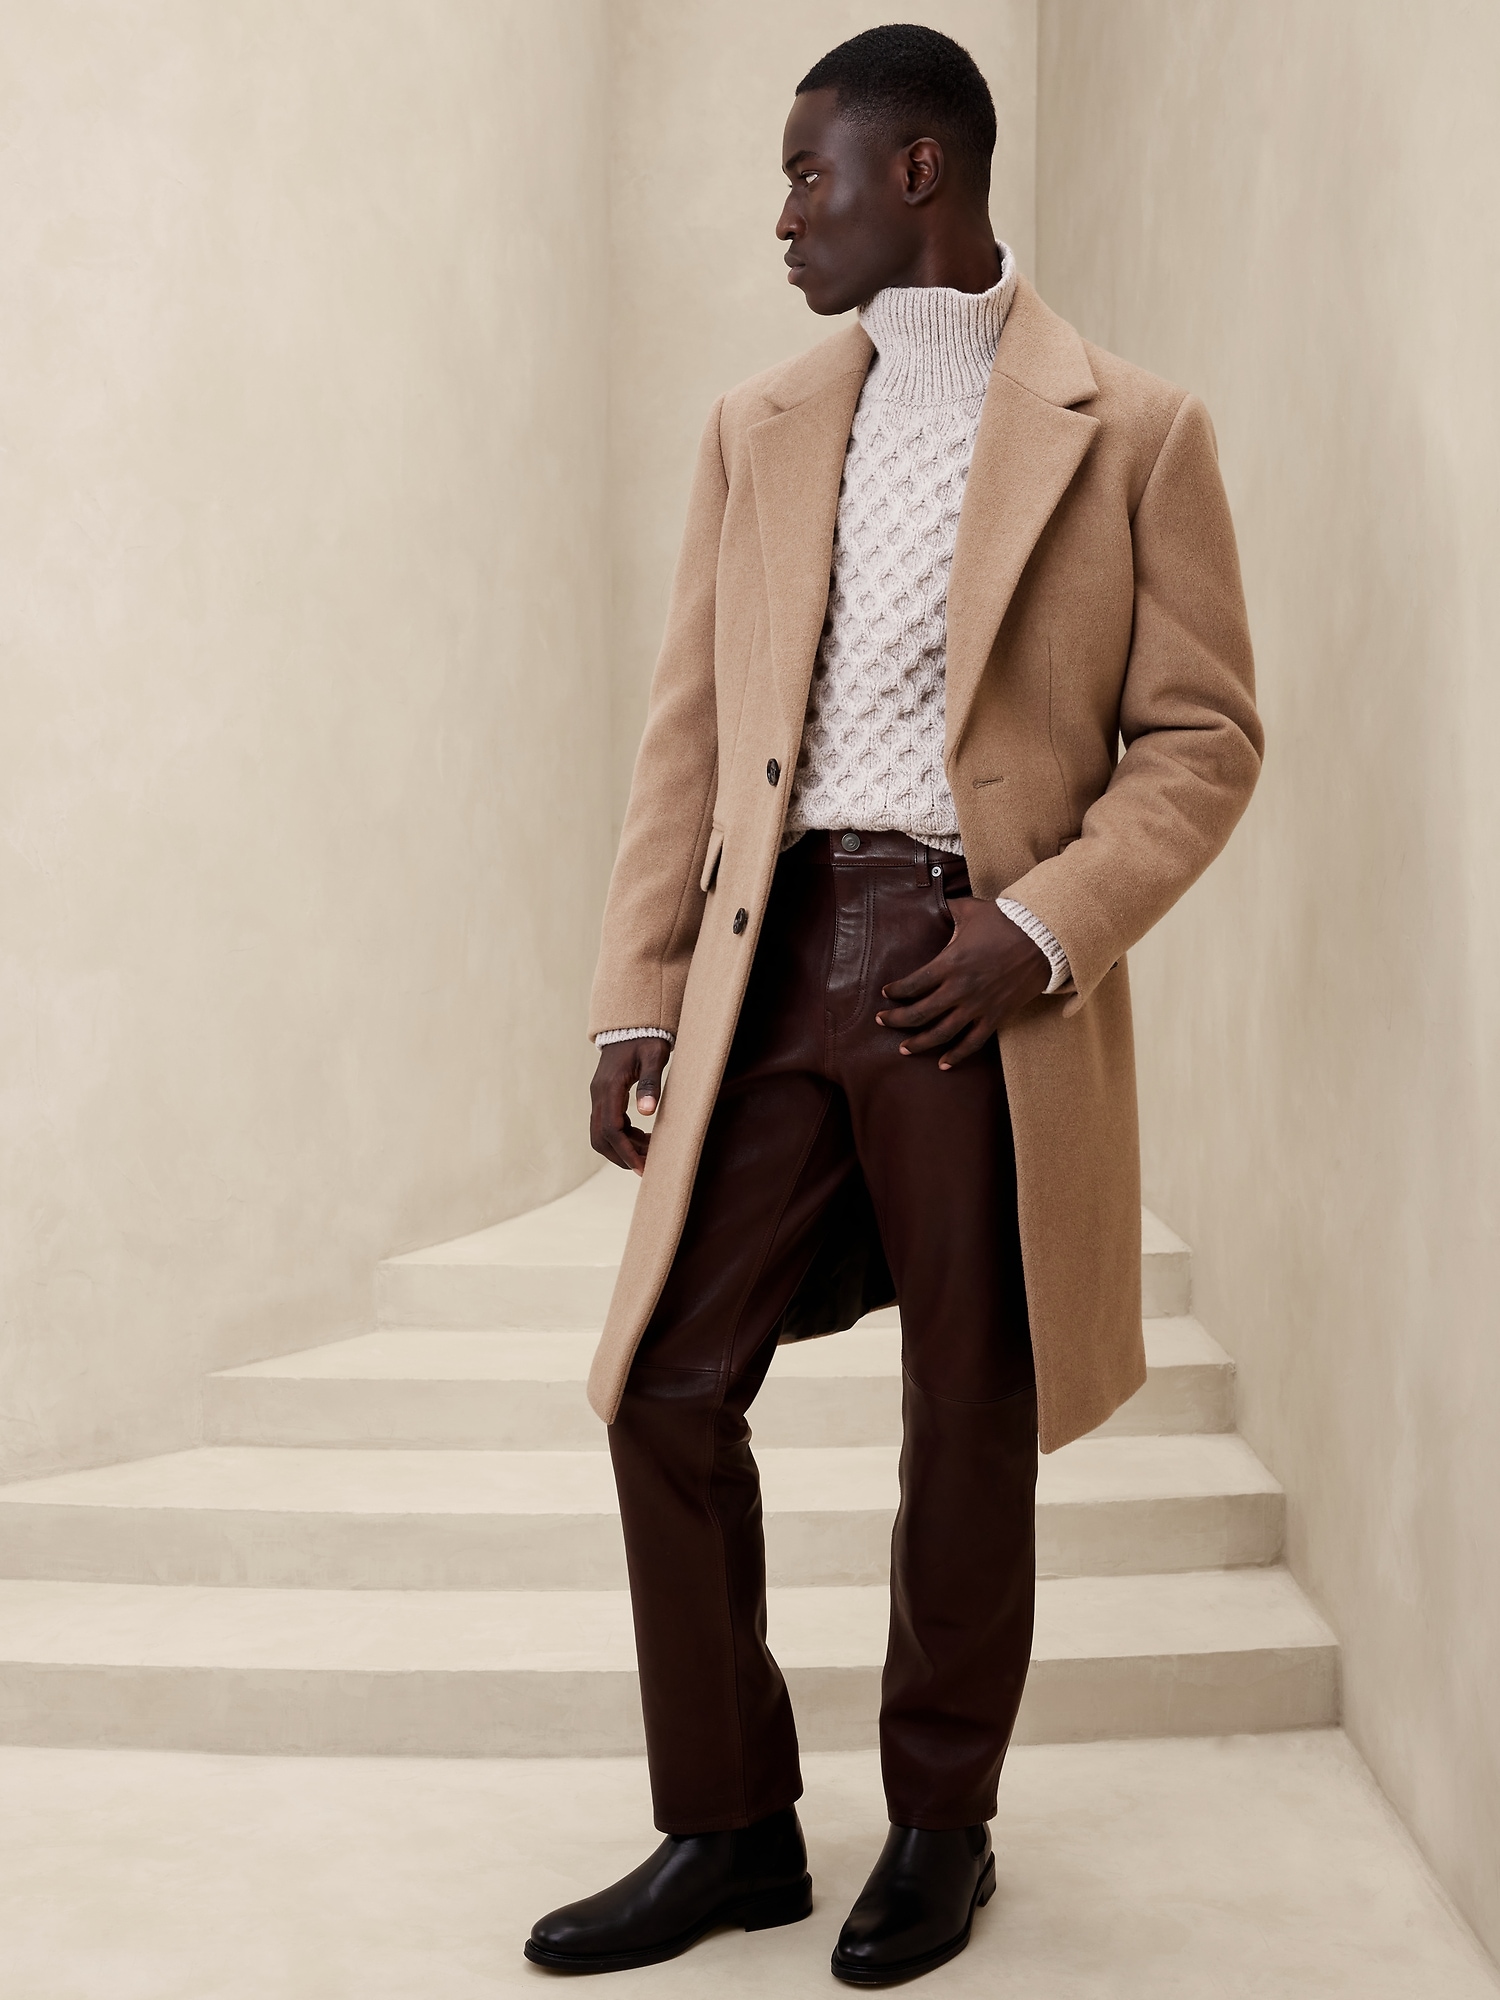 Brown Leather Pants & White Shirt  Brown leather pants, Edgy work